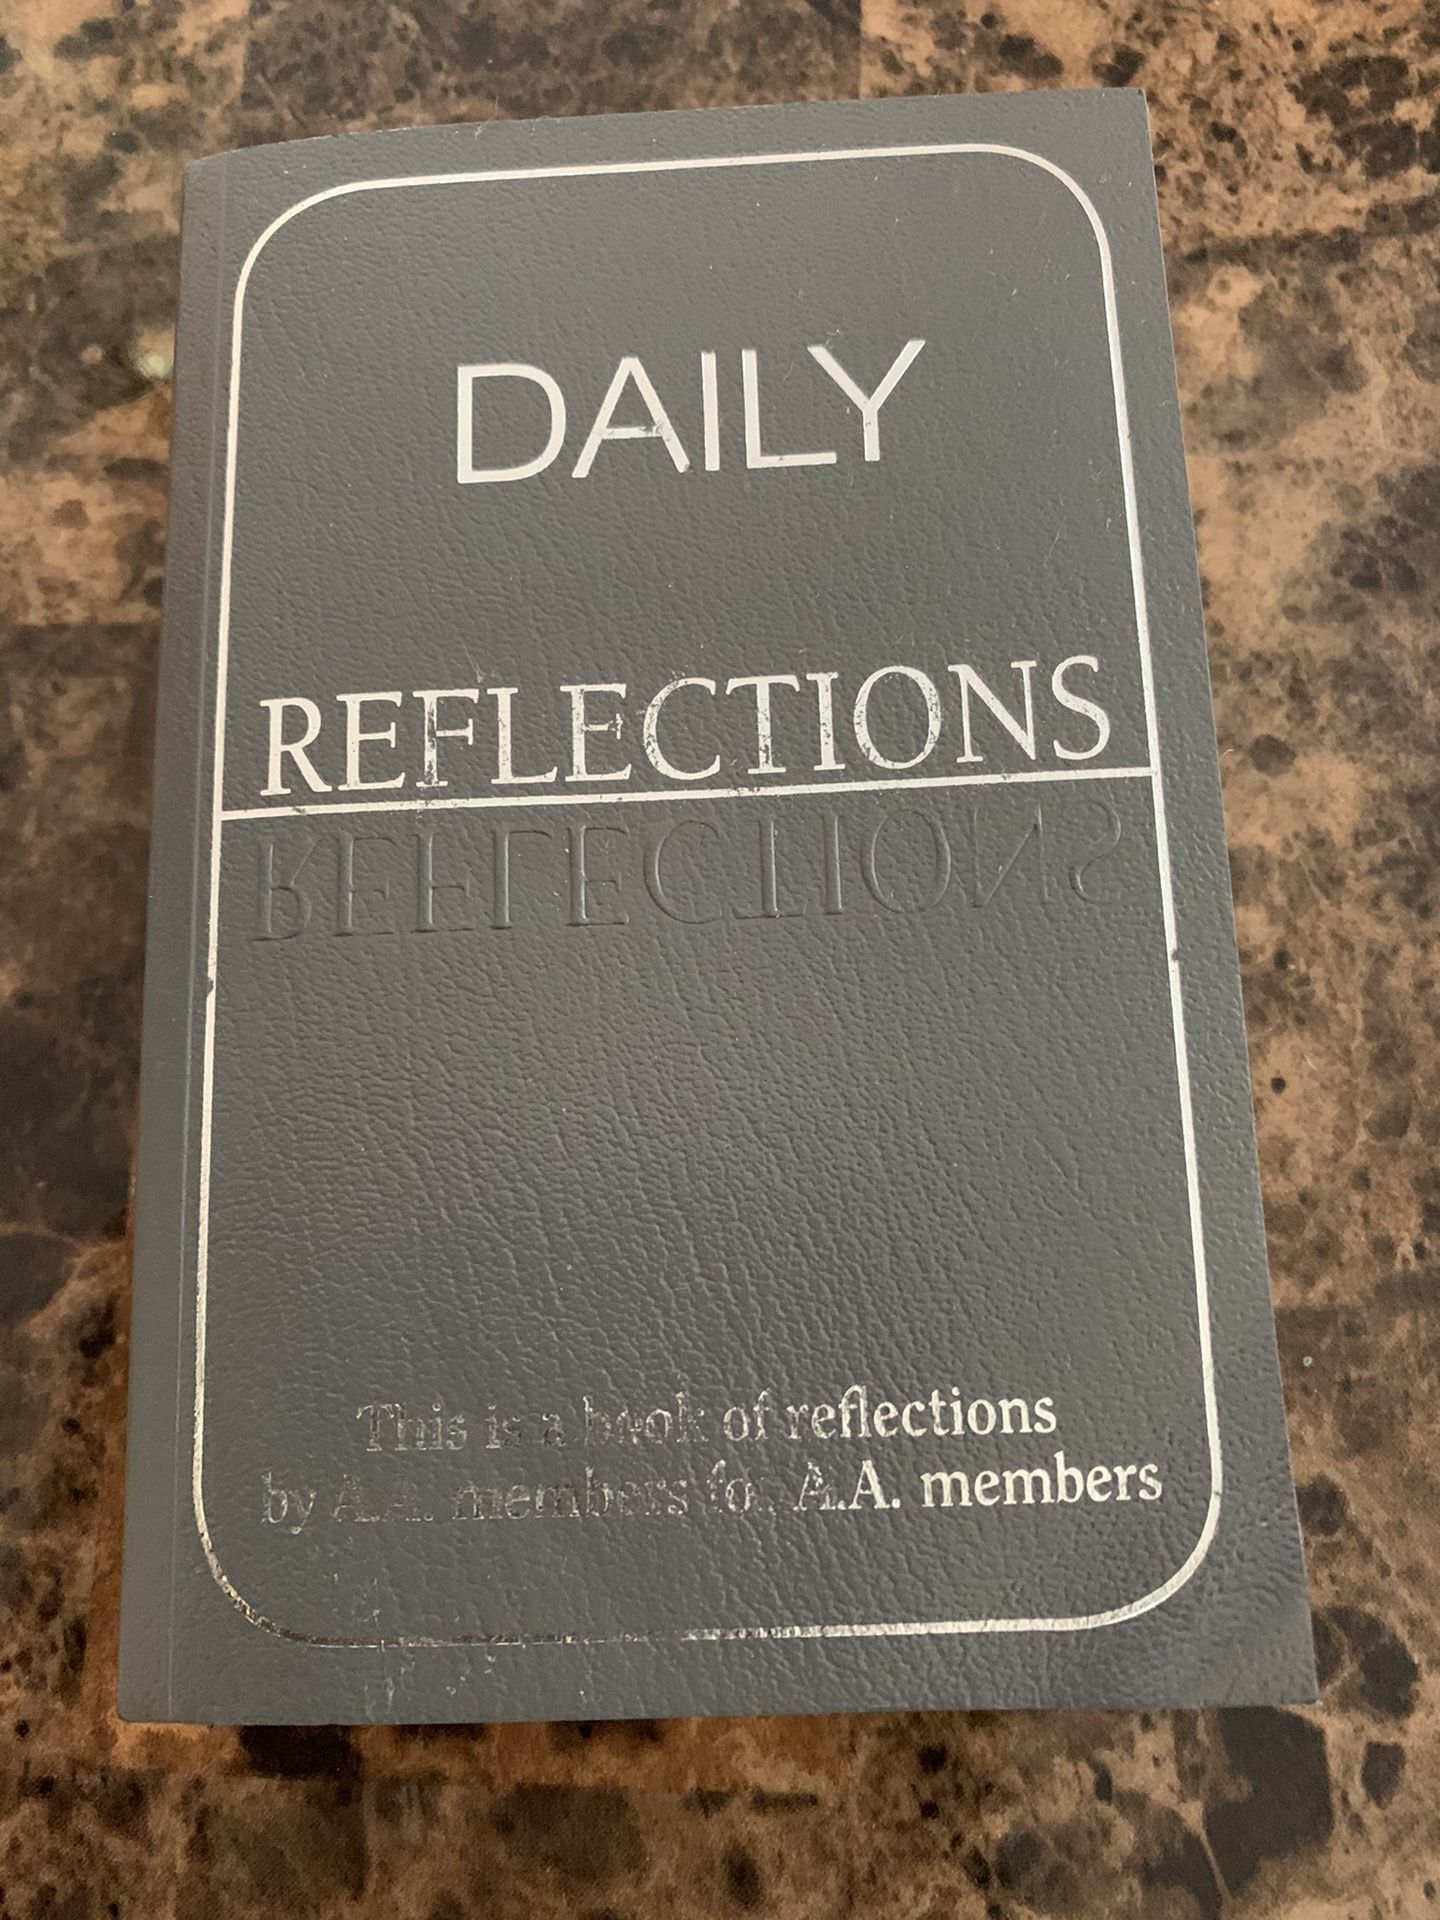 Daily reflections for anyone struggling with an addiction